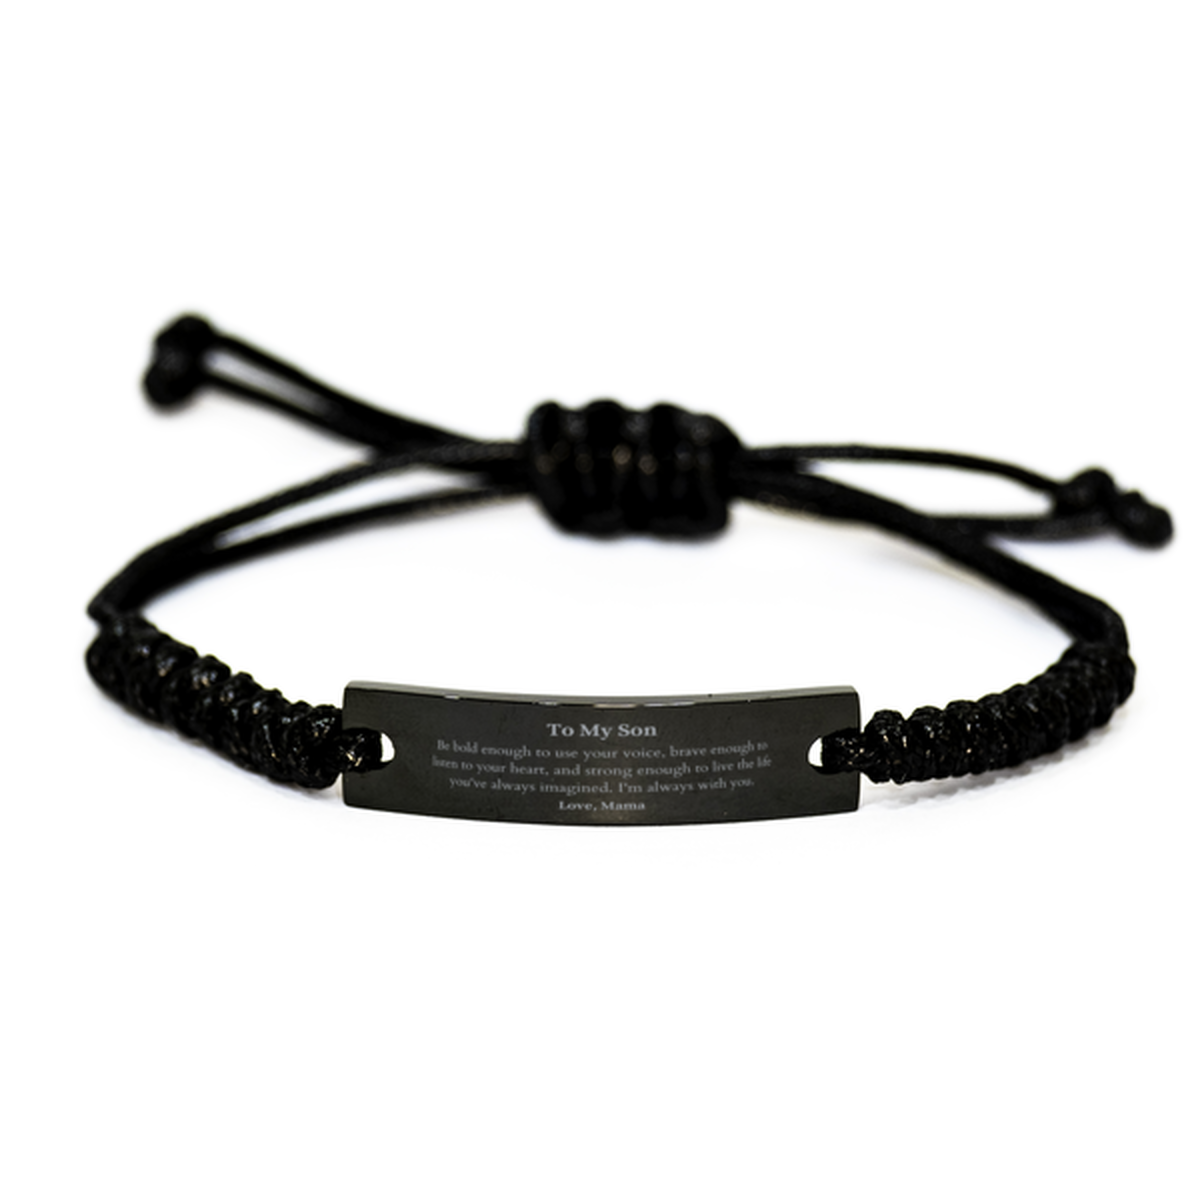 Keepsake Son Black Rope Bracelet Gift Idea Graduation Christmas Birthday Son from Mama, Son Be bold enough to use your voice, brave enough to listen to your heart. Love, Mama